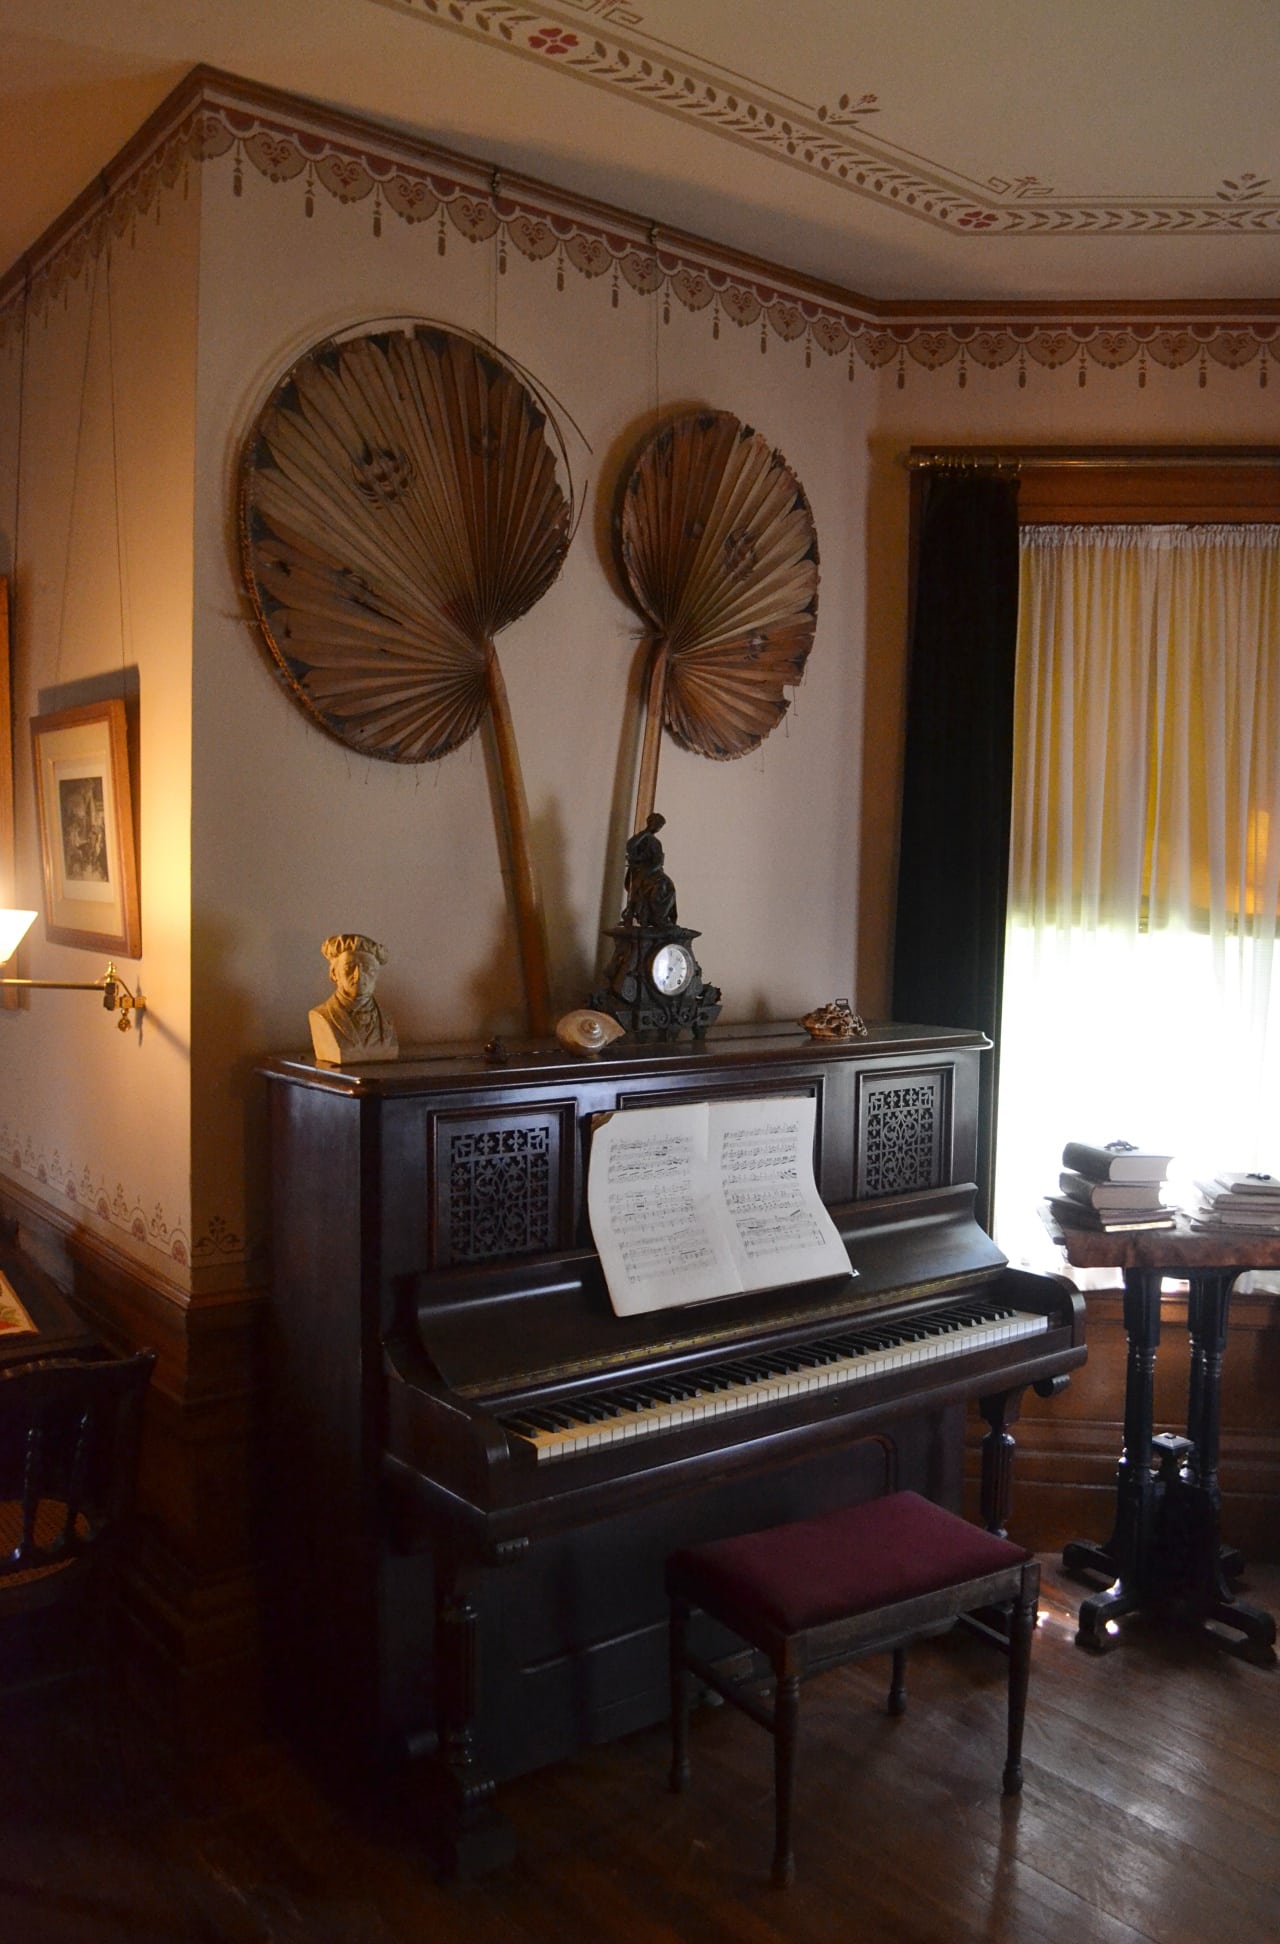 The Fischer upright piano in the schoolroom was given to the girls for Christmas in 1880. 